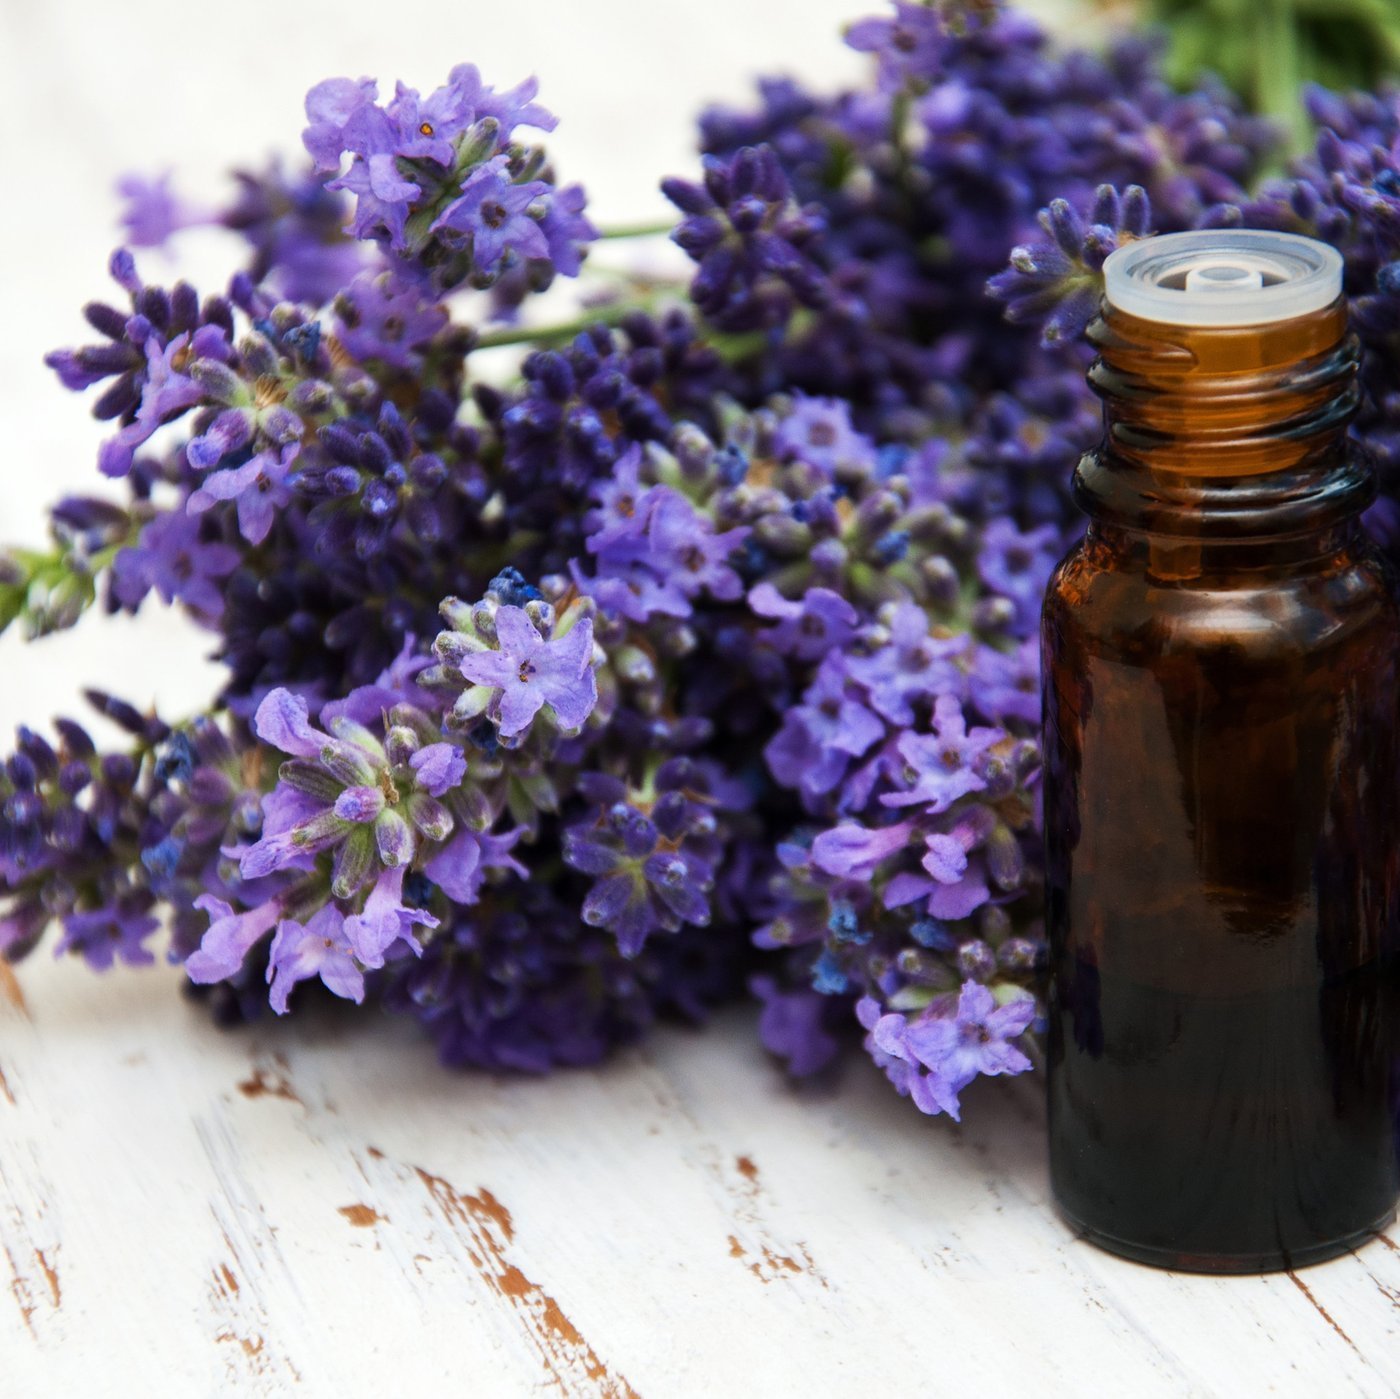 All Things Being Eco - Zero Waste Organic Lavender Bulk Essential Oil